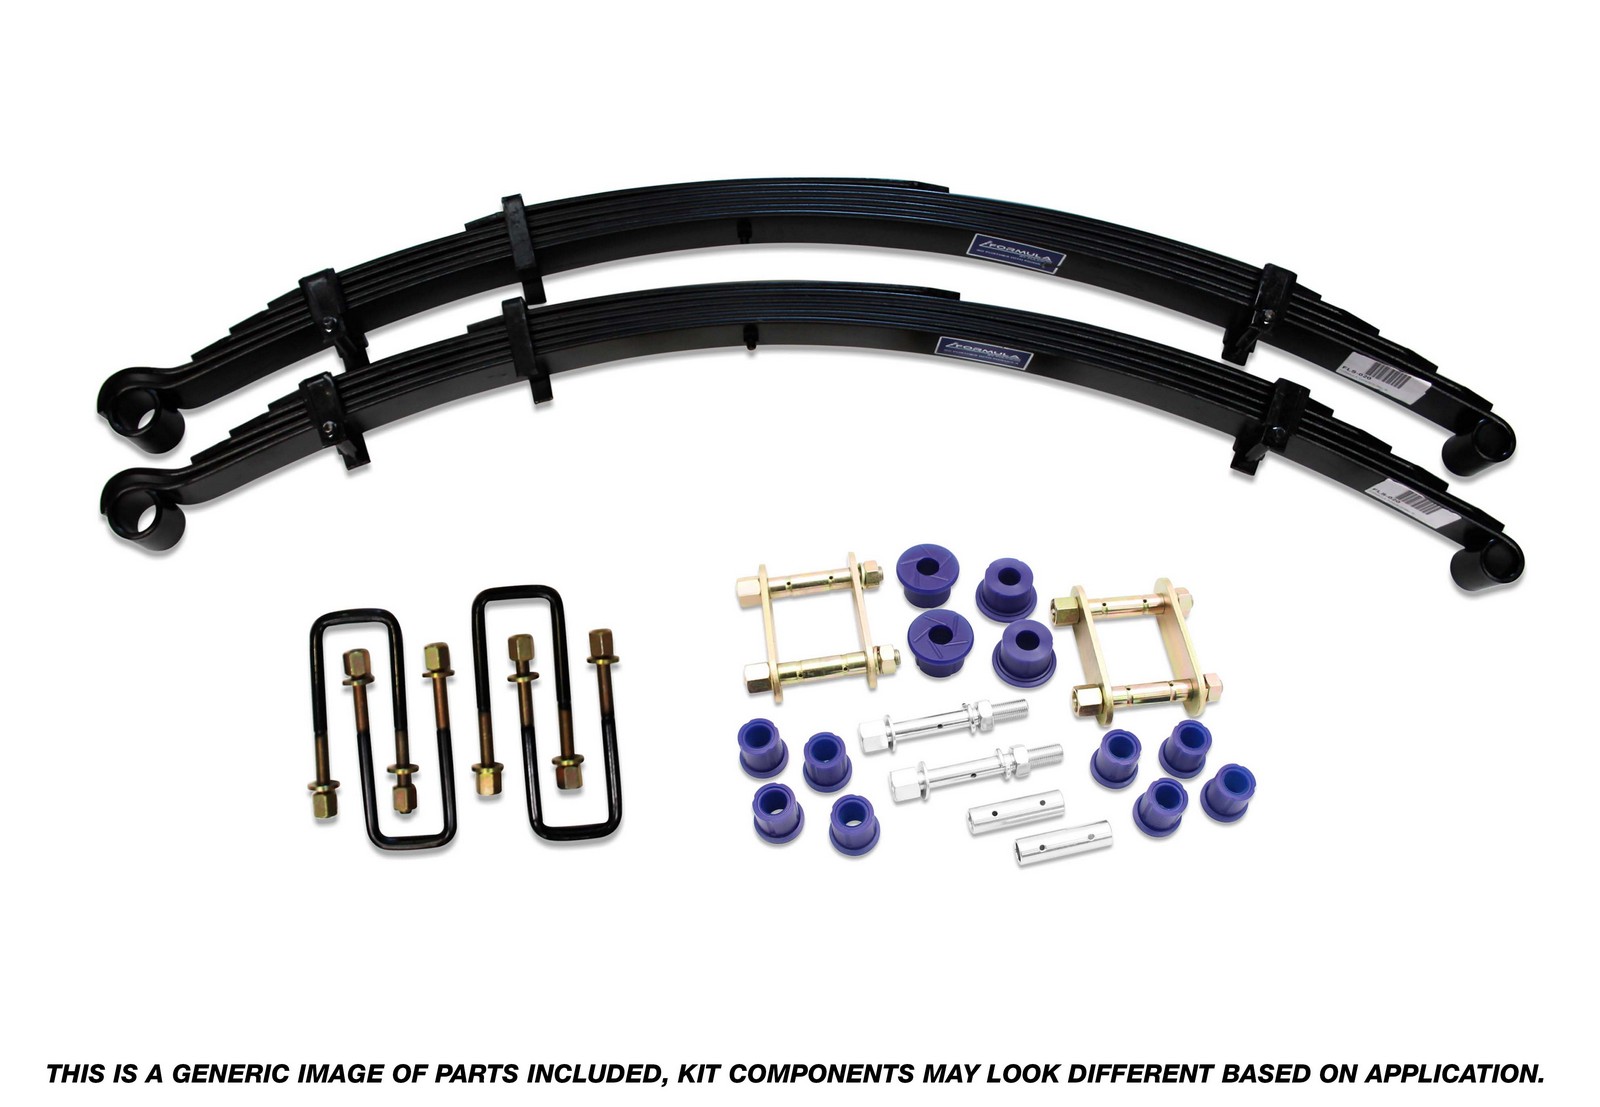 Formula Rear Leaf Spring Kit - 40mm lift at 200kg to suit Holden Colorado 2008-2012, Isuzu D-Max 2002-2012 & Great Wall V240 2009-2015